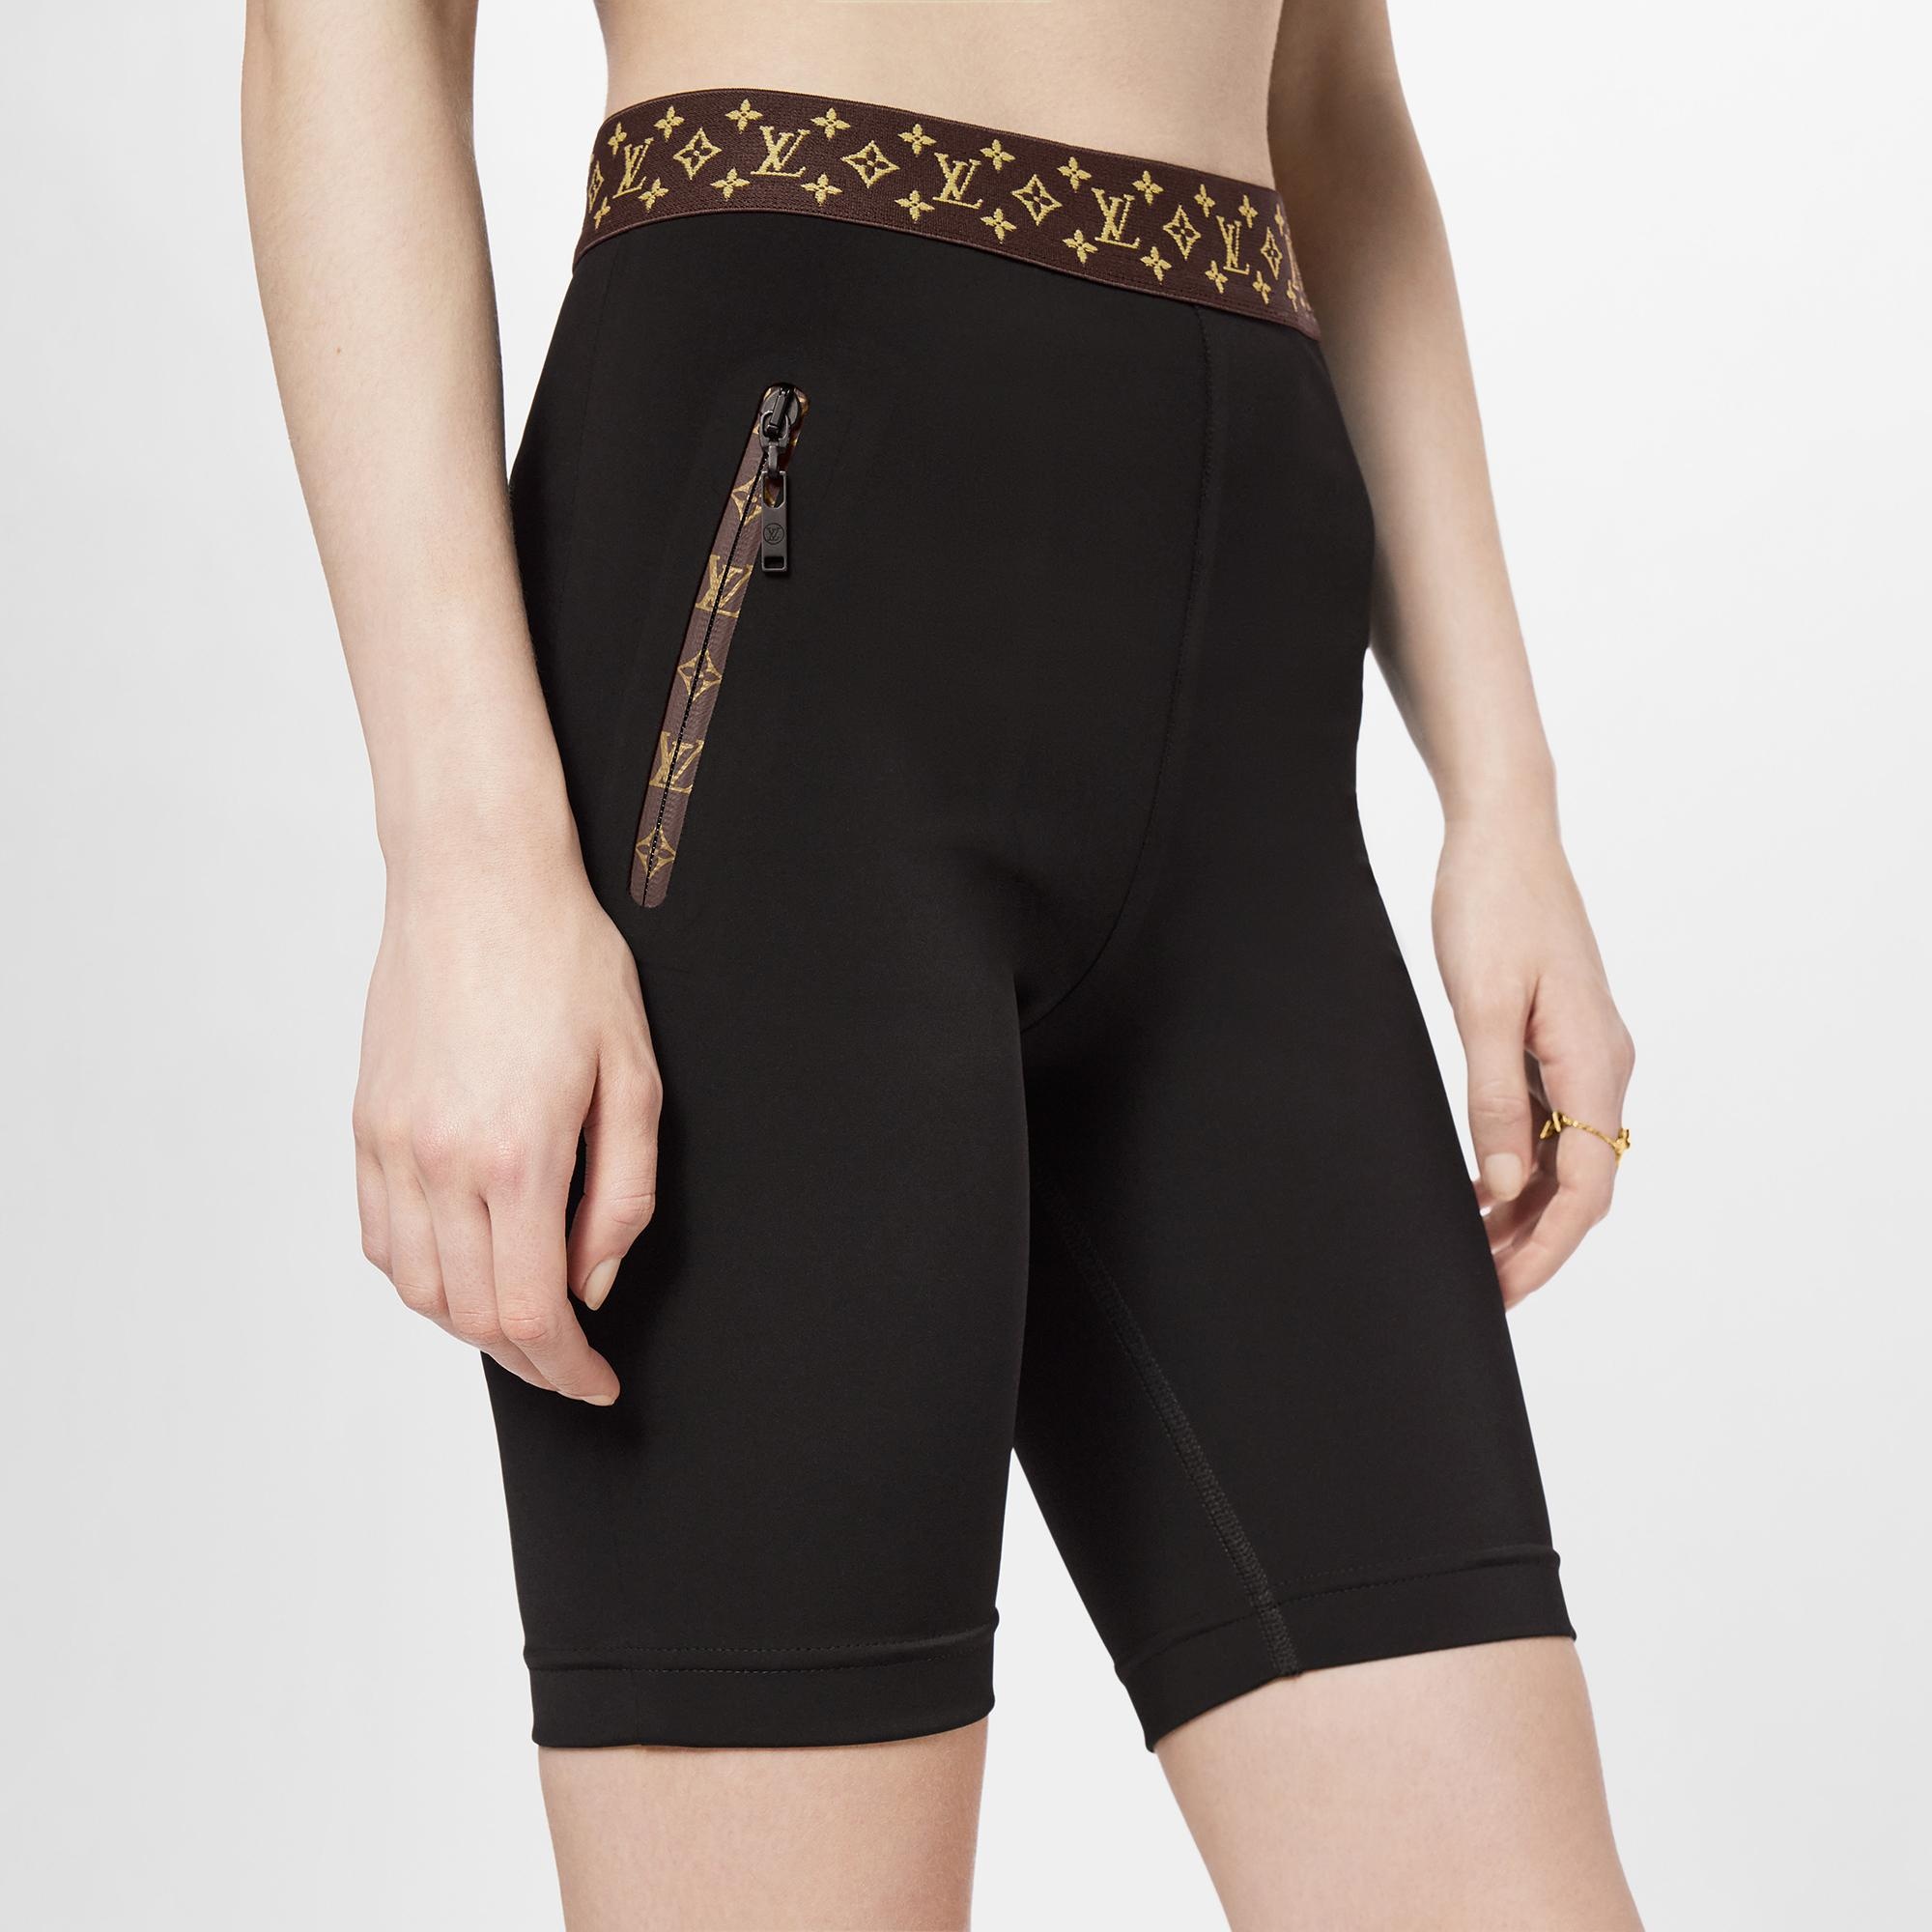 Cycling Shorts With Monogram Belt - 4